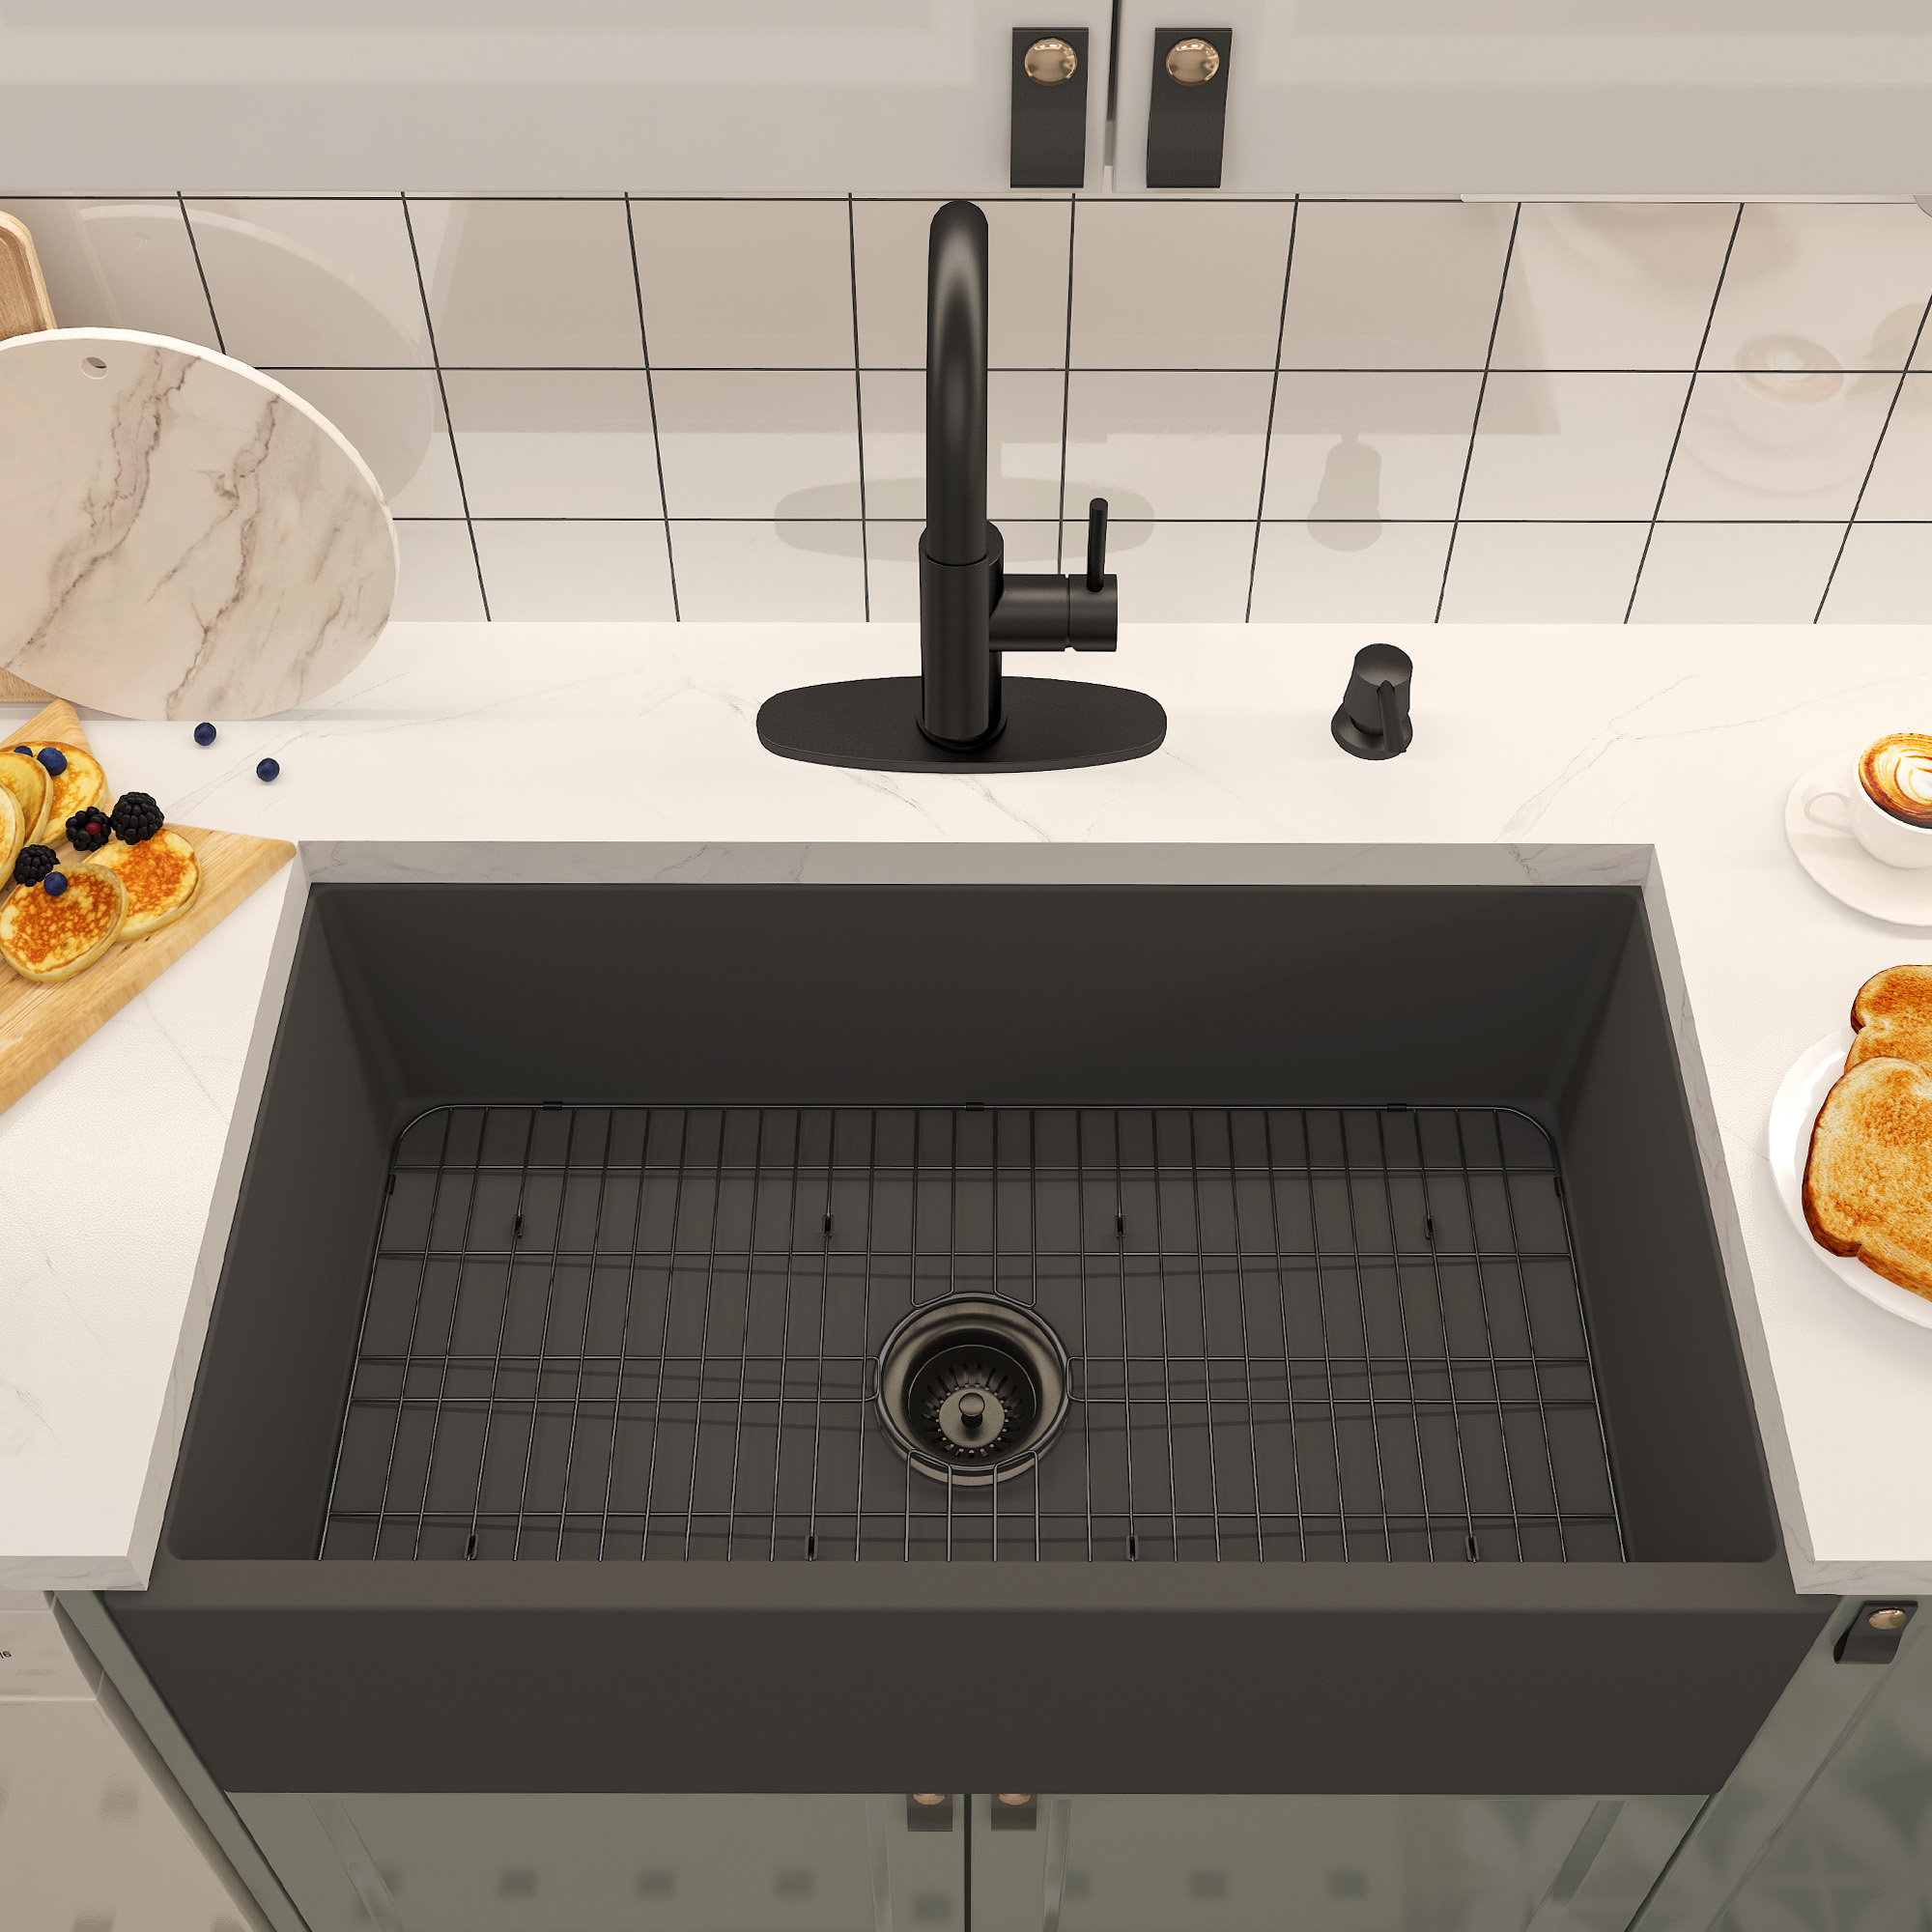 Concrete 33 in. Single Bowl Farmhouse Apron Kitchen Sink with Bottom Grid and Drainer Black Earth/Taupe Clay